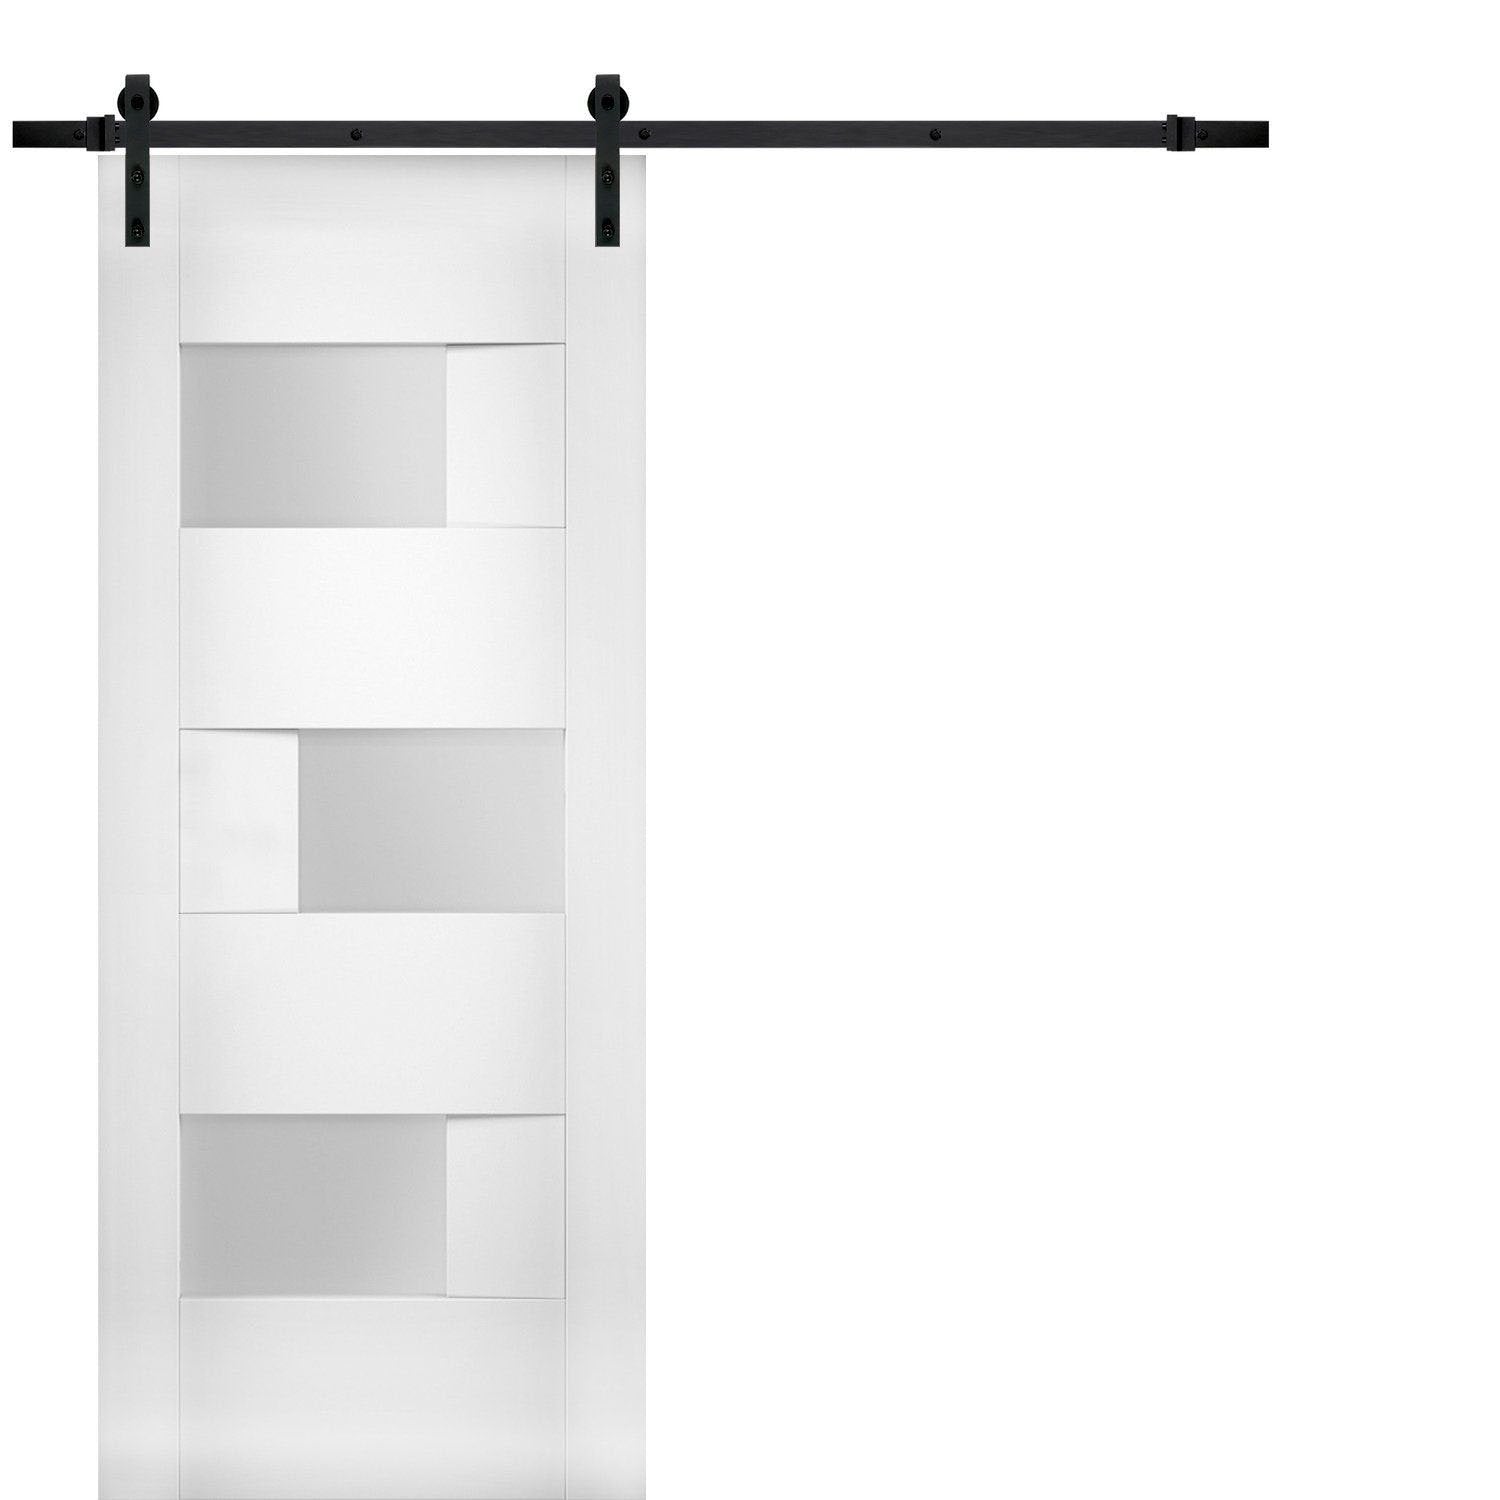 Sete 6933 White Silk Barn Door with Frosted Glass and Black Rail